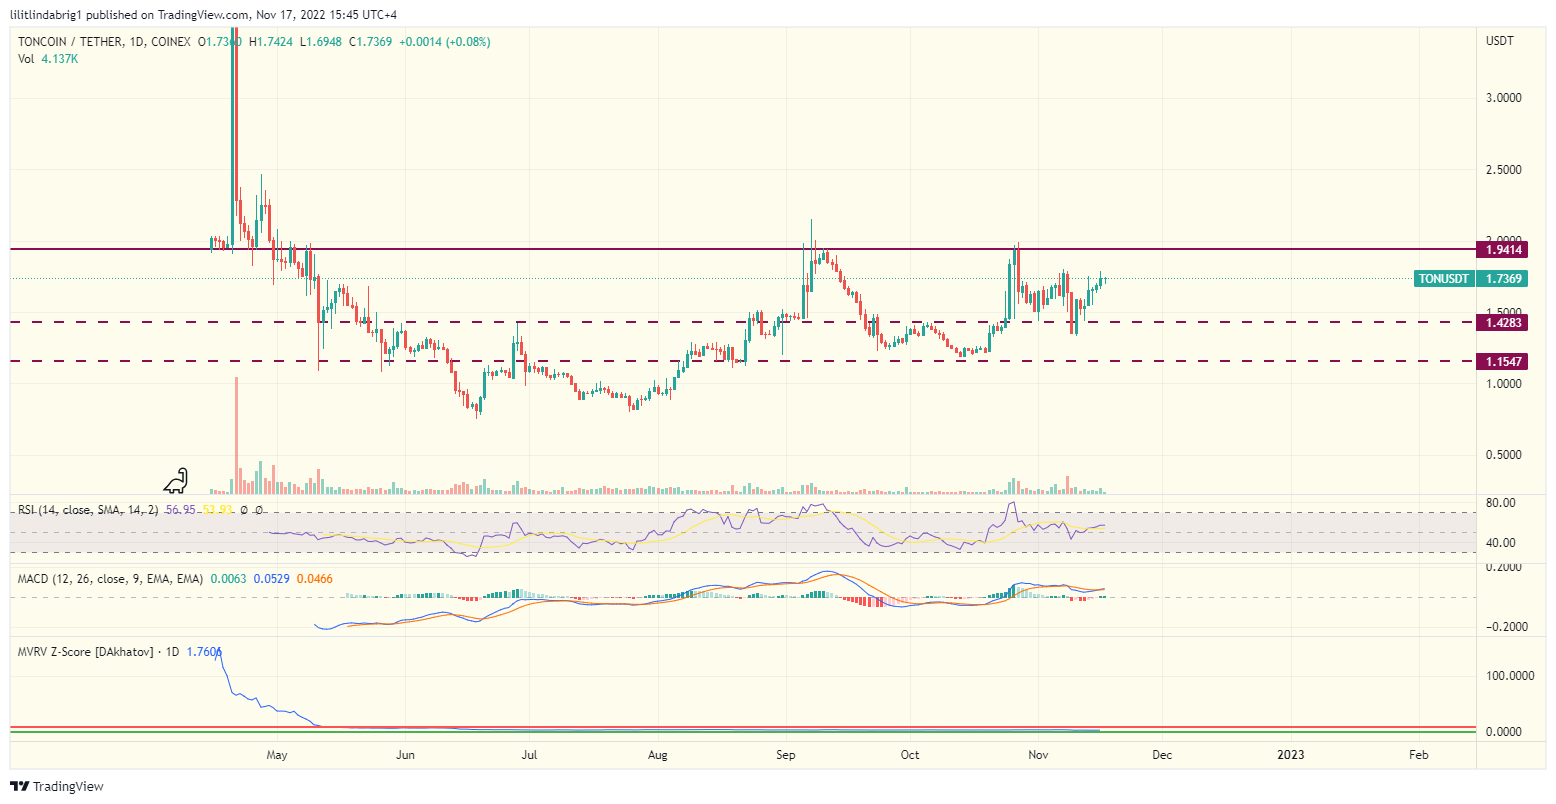 Toncoin (TON) daily price action chart. 